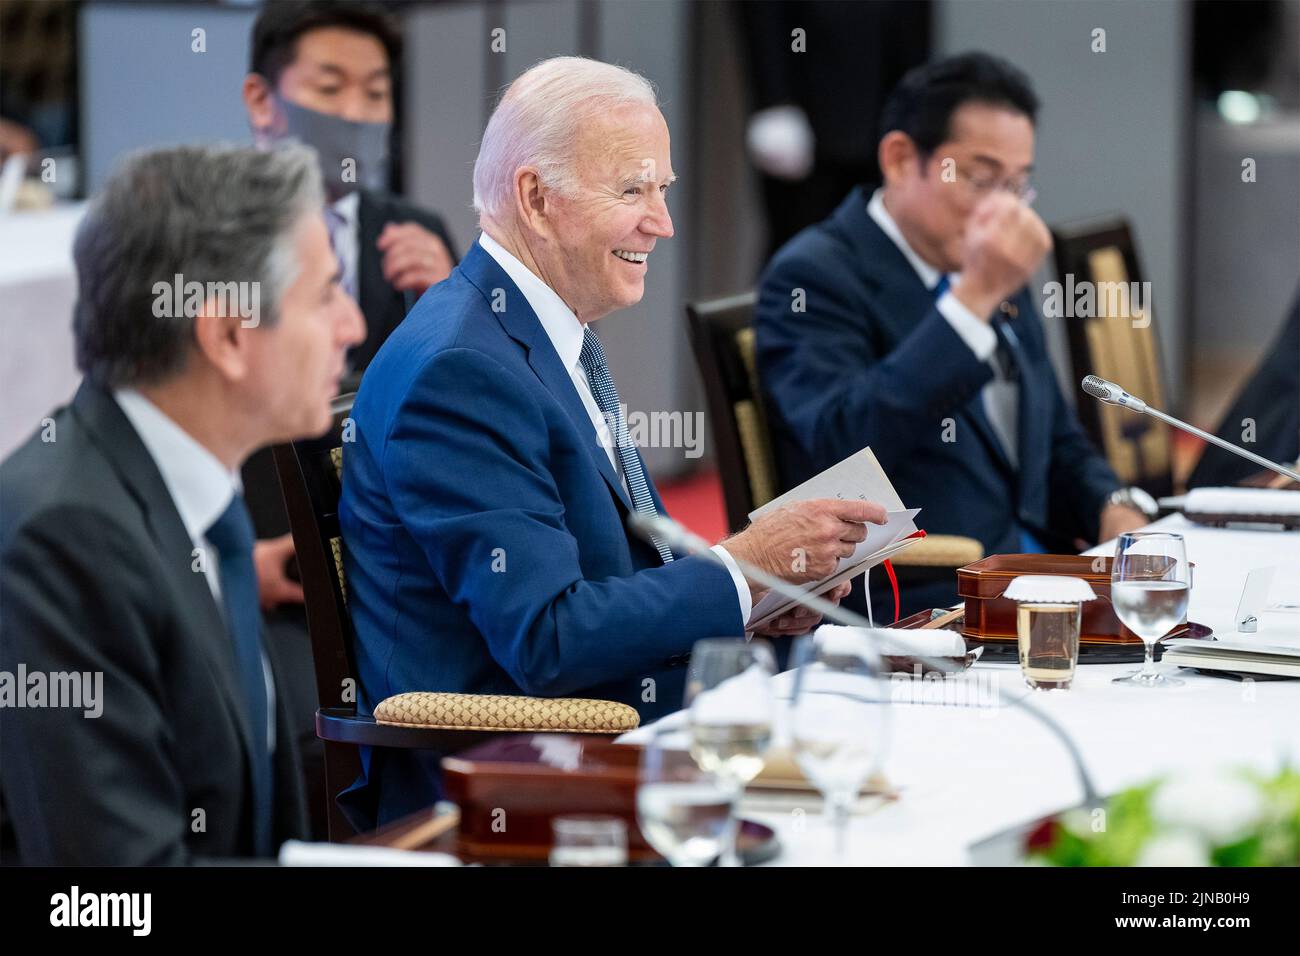 Tokyo, Japan. 24 May, 2022. U.S. President Joe Biden, center, smiles during a working lunch with Quad Leaders at the Japanese Prime Minister residence of Kantei, May 24, 2022, in Tokyo, Japan. From left, U.S. Secretary of State Tony Blinken, President Joe Biden and Japanese Prime Minister Fumio Kishida.  Credit: Adam Schultz/U.S. State Department/Alamy Live News Stock Photo